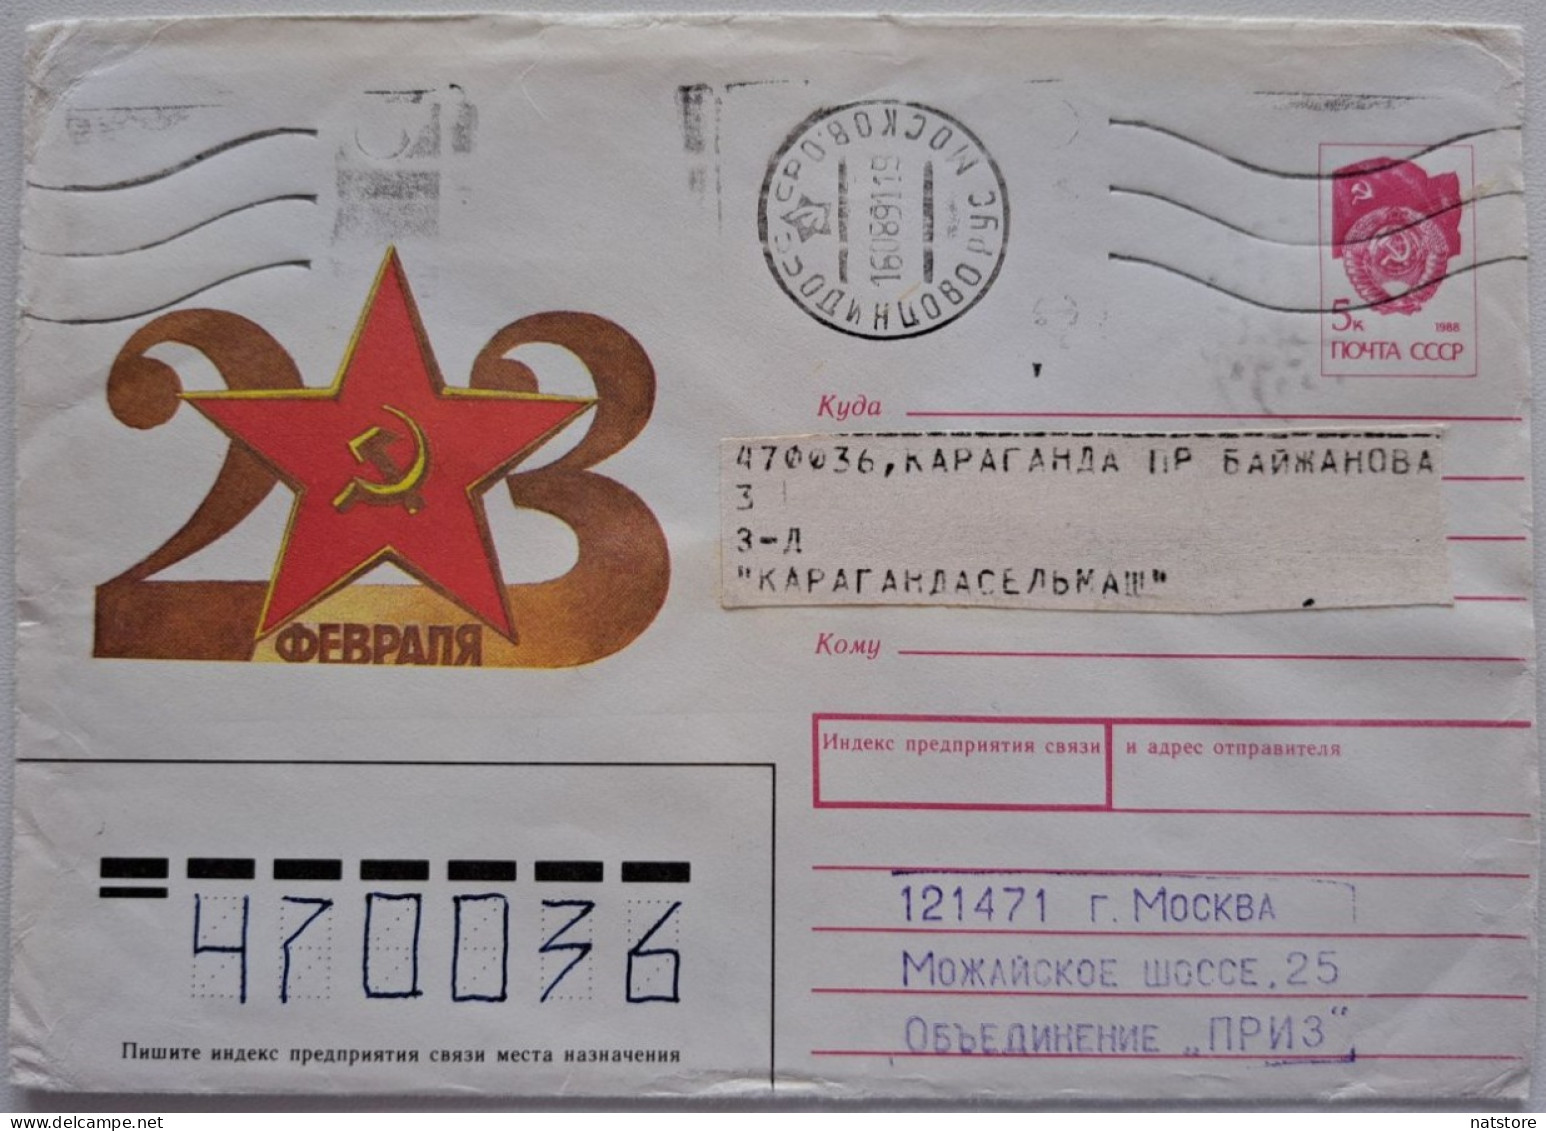 1990..USSR..COVER WITH   STAMP..PAST MAIL..FEBRUARY 23! - Covers & Documents